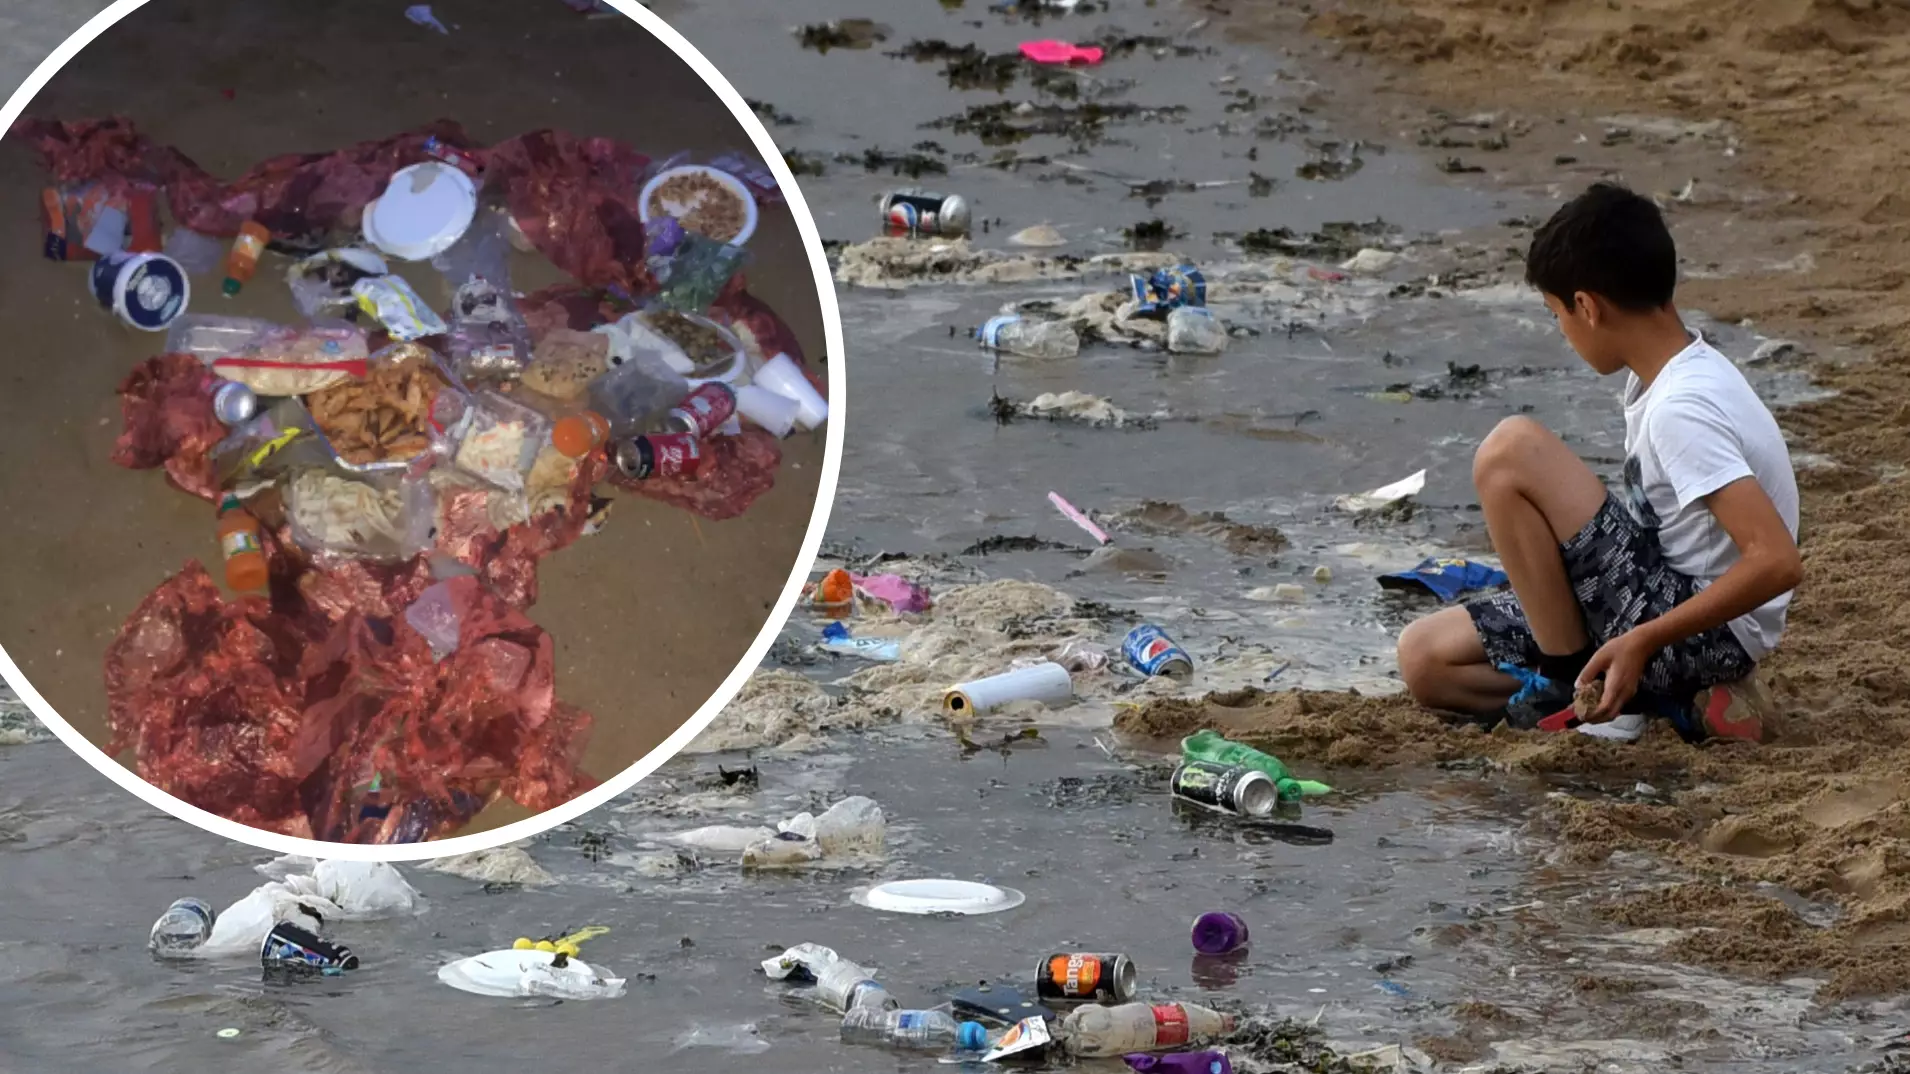 UK Beaches Filled With Rubbish And Plastic After July Heatwave